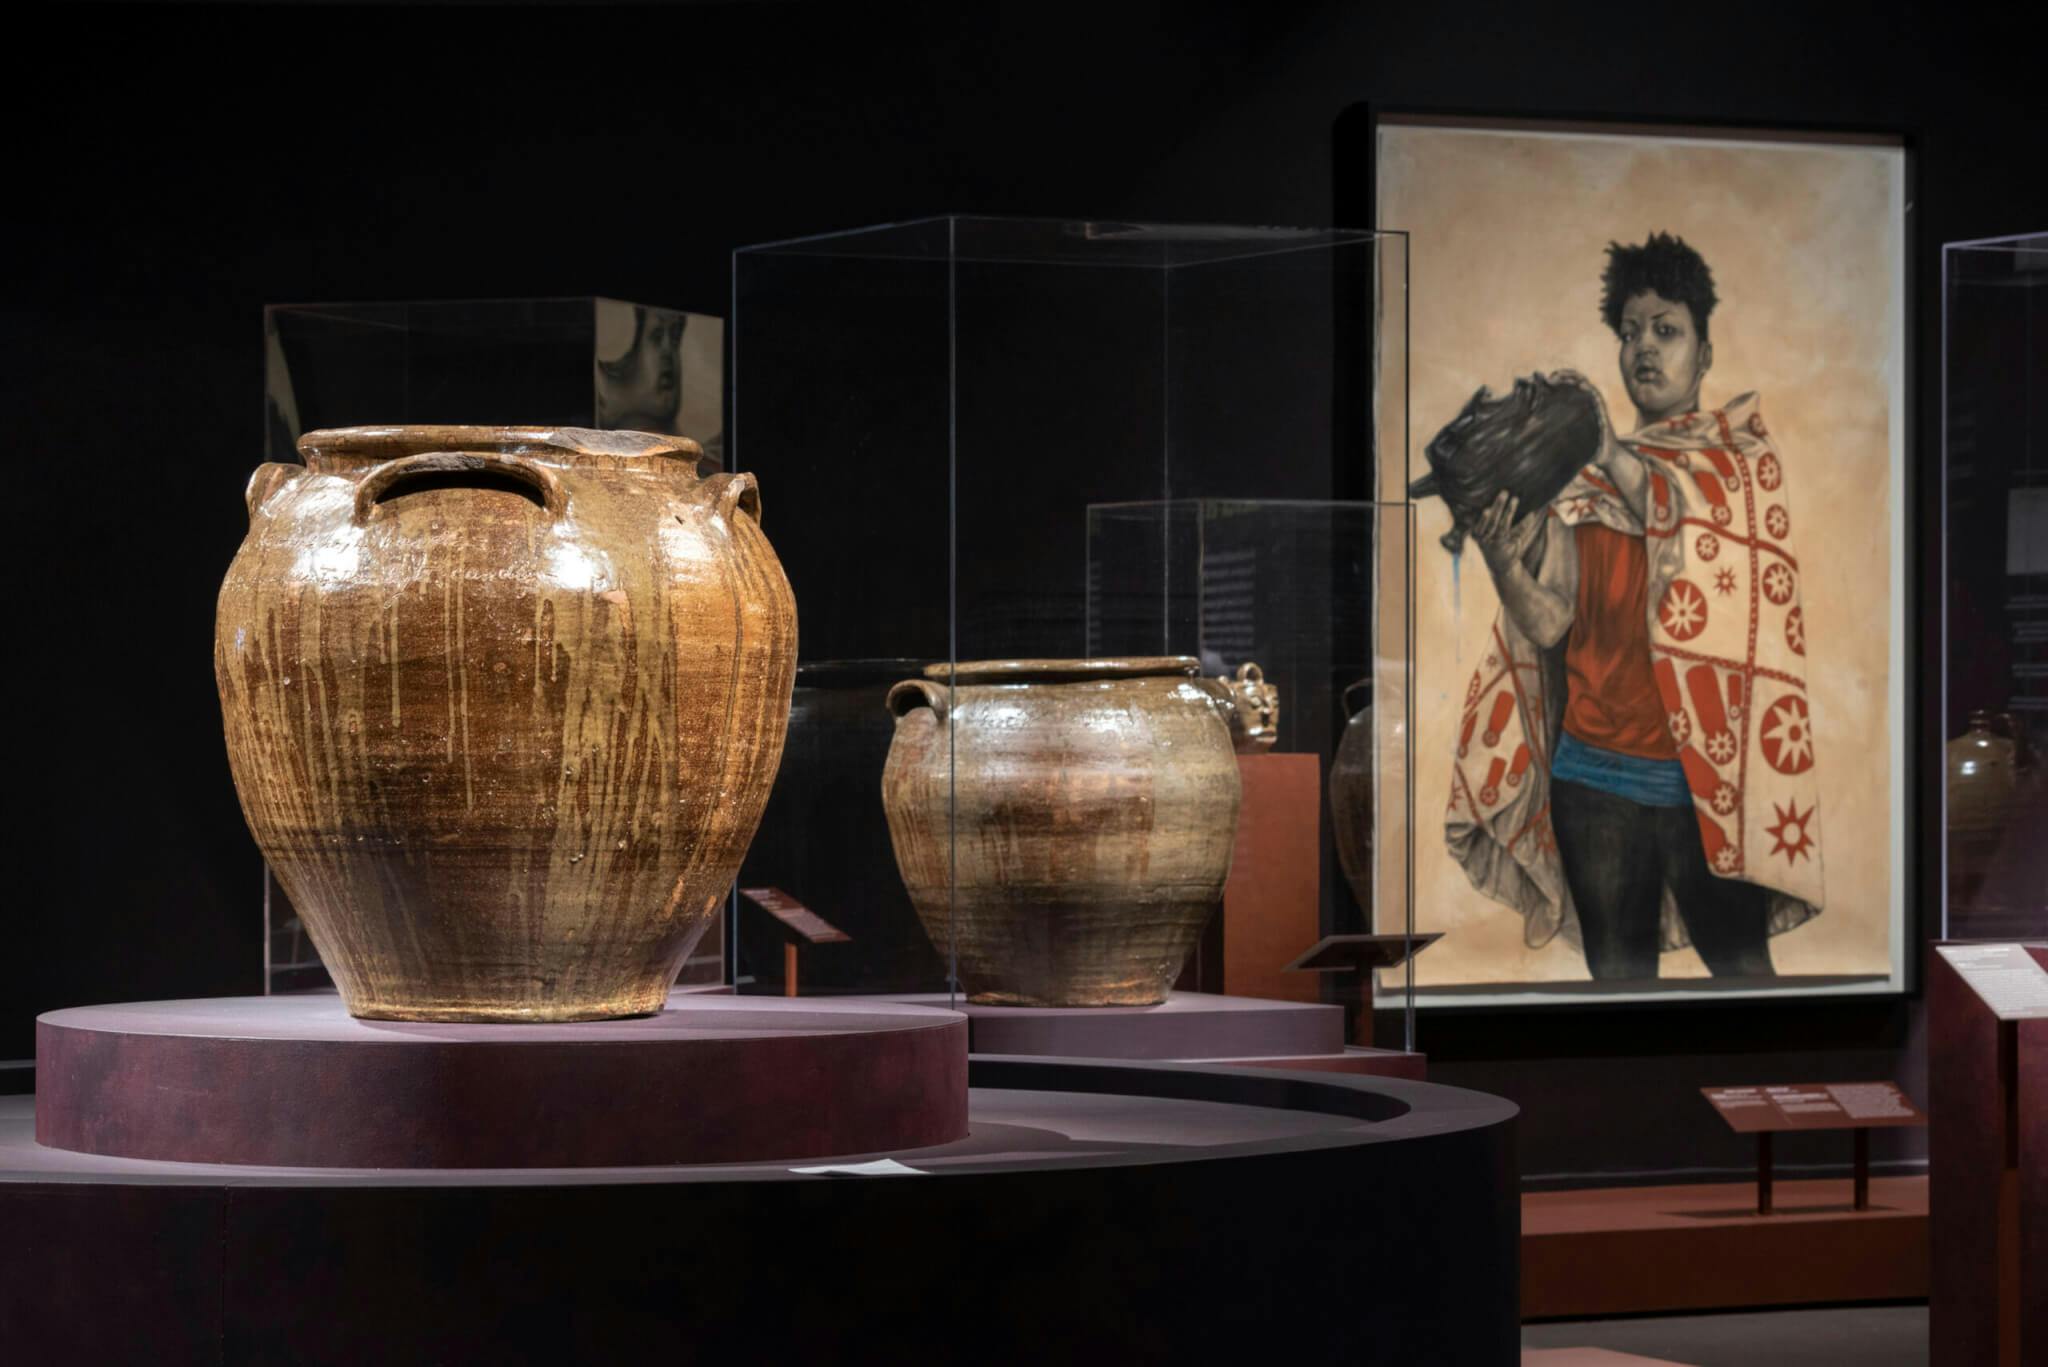 Installation view of "The Black Potters of Old Edgefield, South Carolina" at the Museum of Fine Arts